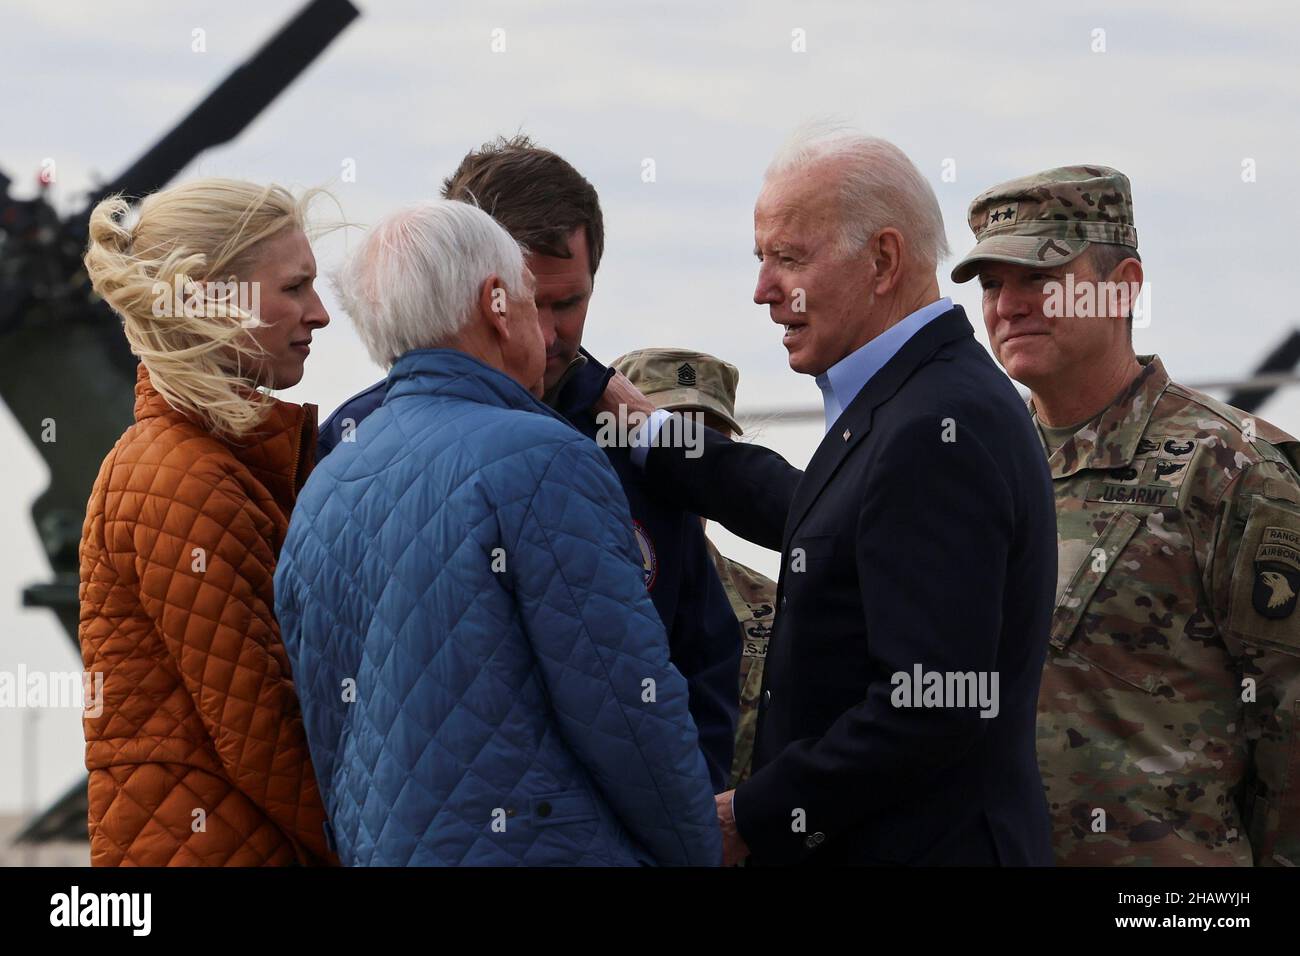 U.S. President Joe Biden is greeted by Kentucky's Governor Andy Beshear, first lady Britainy Beshear, Kentucky's former Governor Steve Beshear, General Joseph P. McGee, Commanding General, 101st Airborne Division and Command Sergeant Major Veronica E. Knapp, Command Sergeant Major, 101st Airborne Division, at Fort Campbell, Kentucky, U.S., December 15, 2021. REUTERS/Evelyn Hockstein Stock Photo